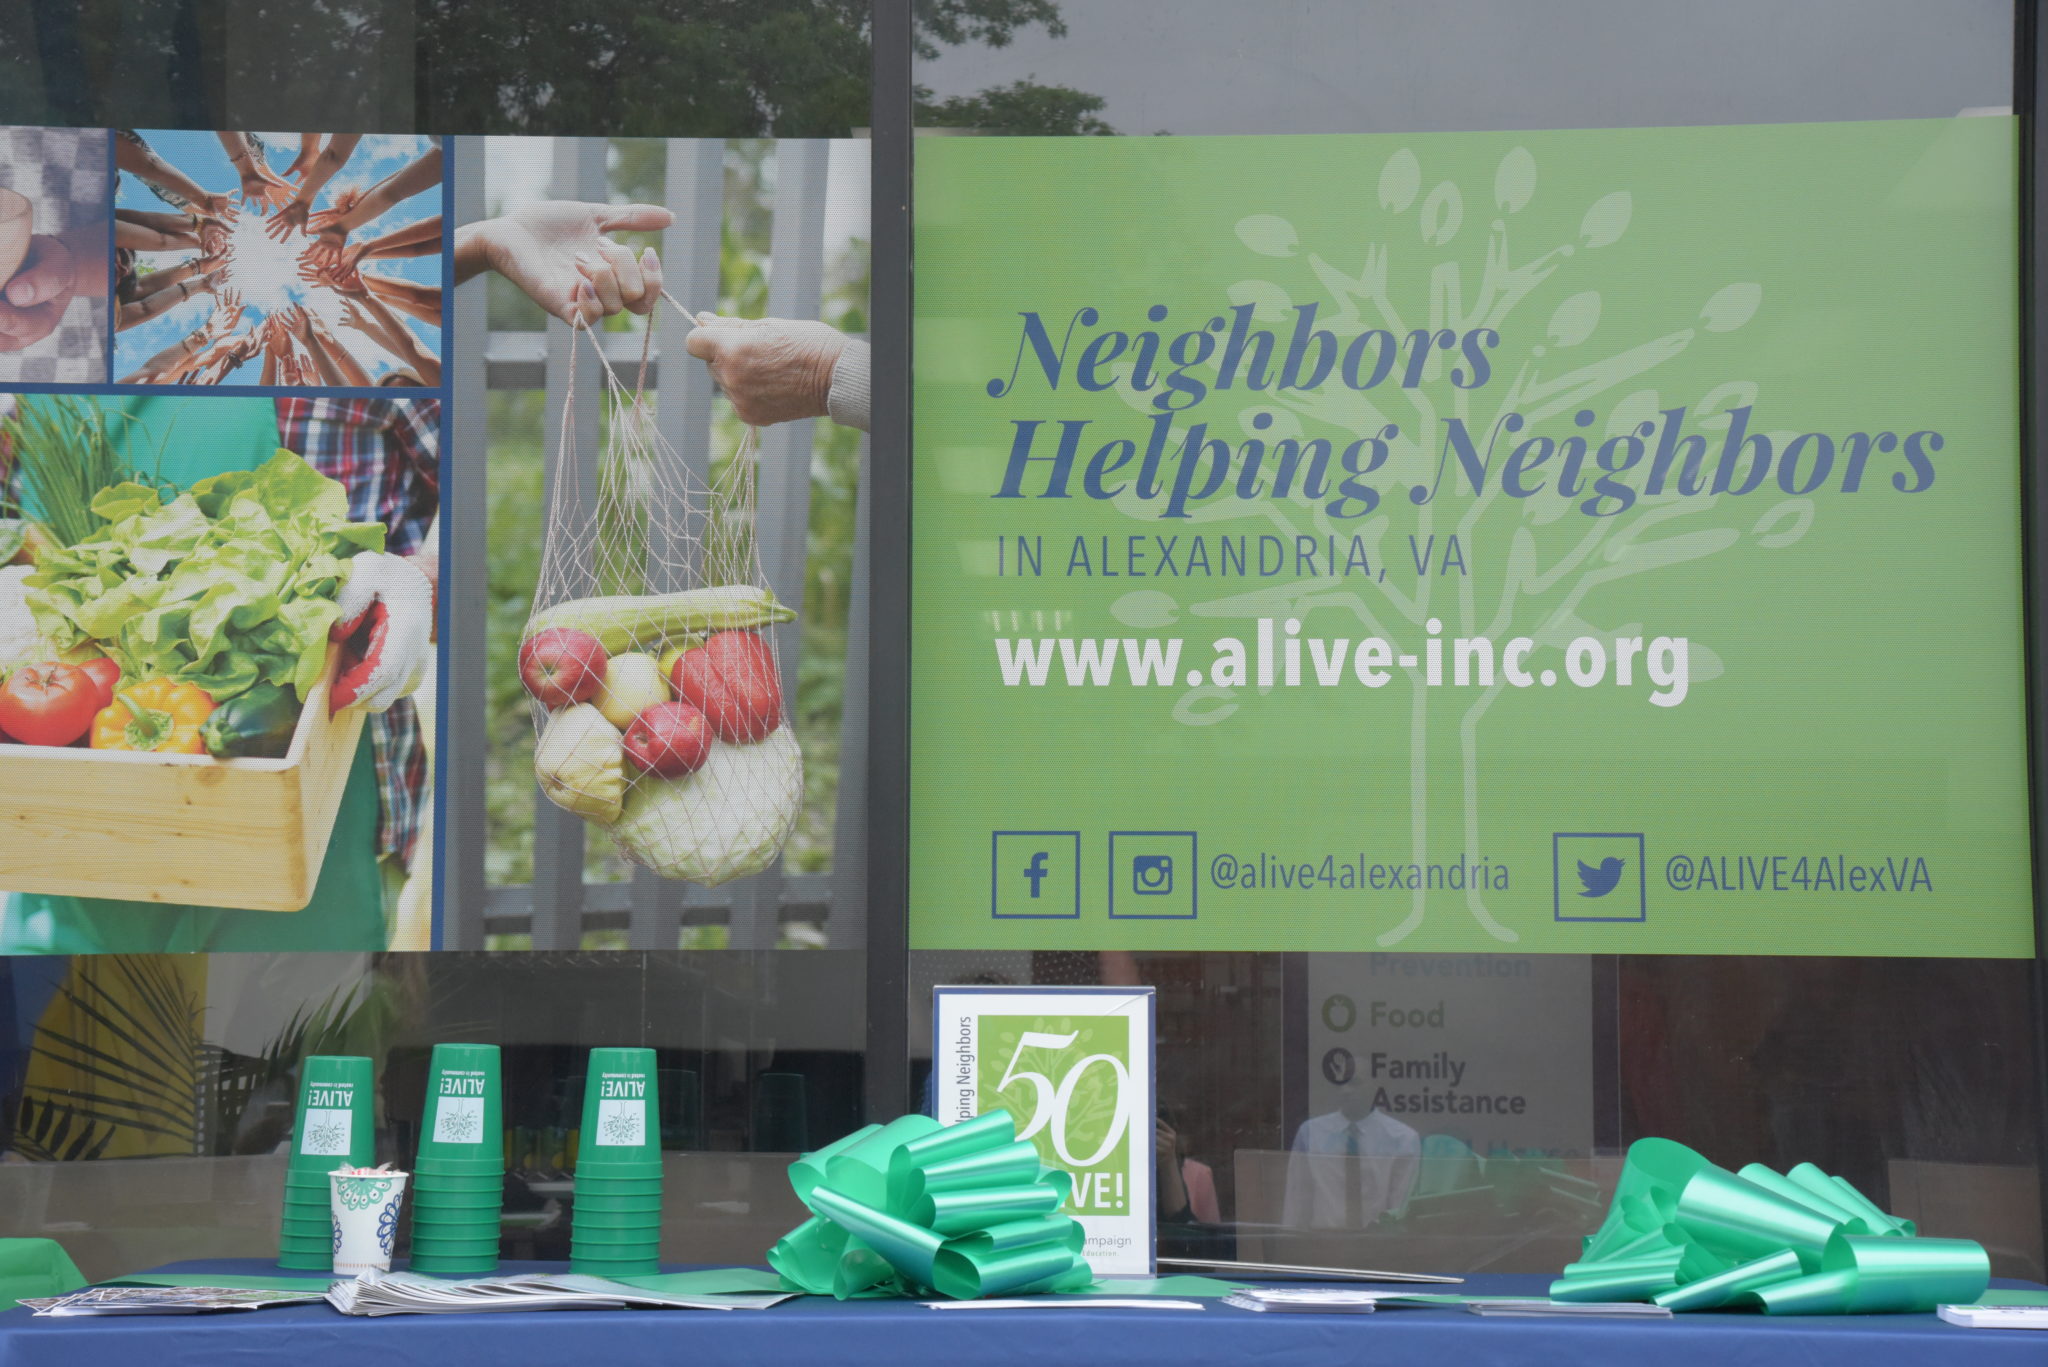 a banner in a window which reads Neighbors Helping Neighbors, www.alive-inc.org